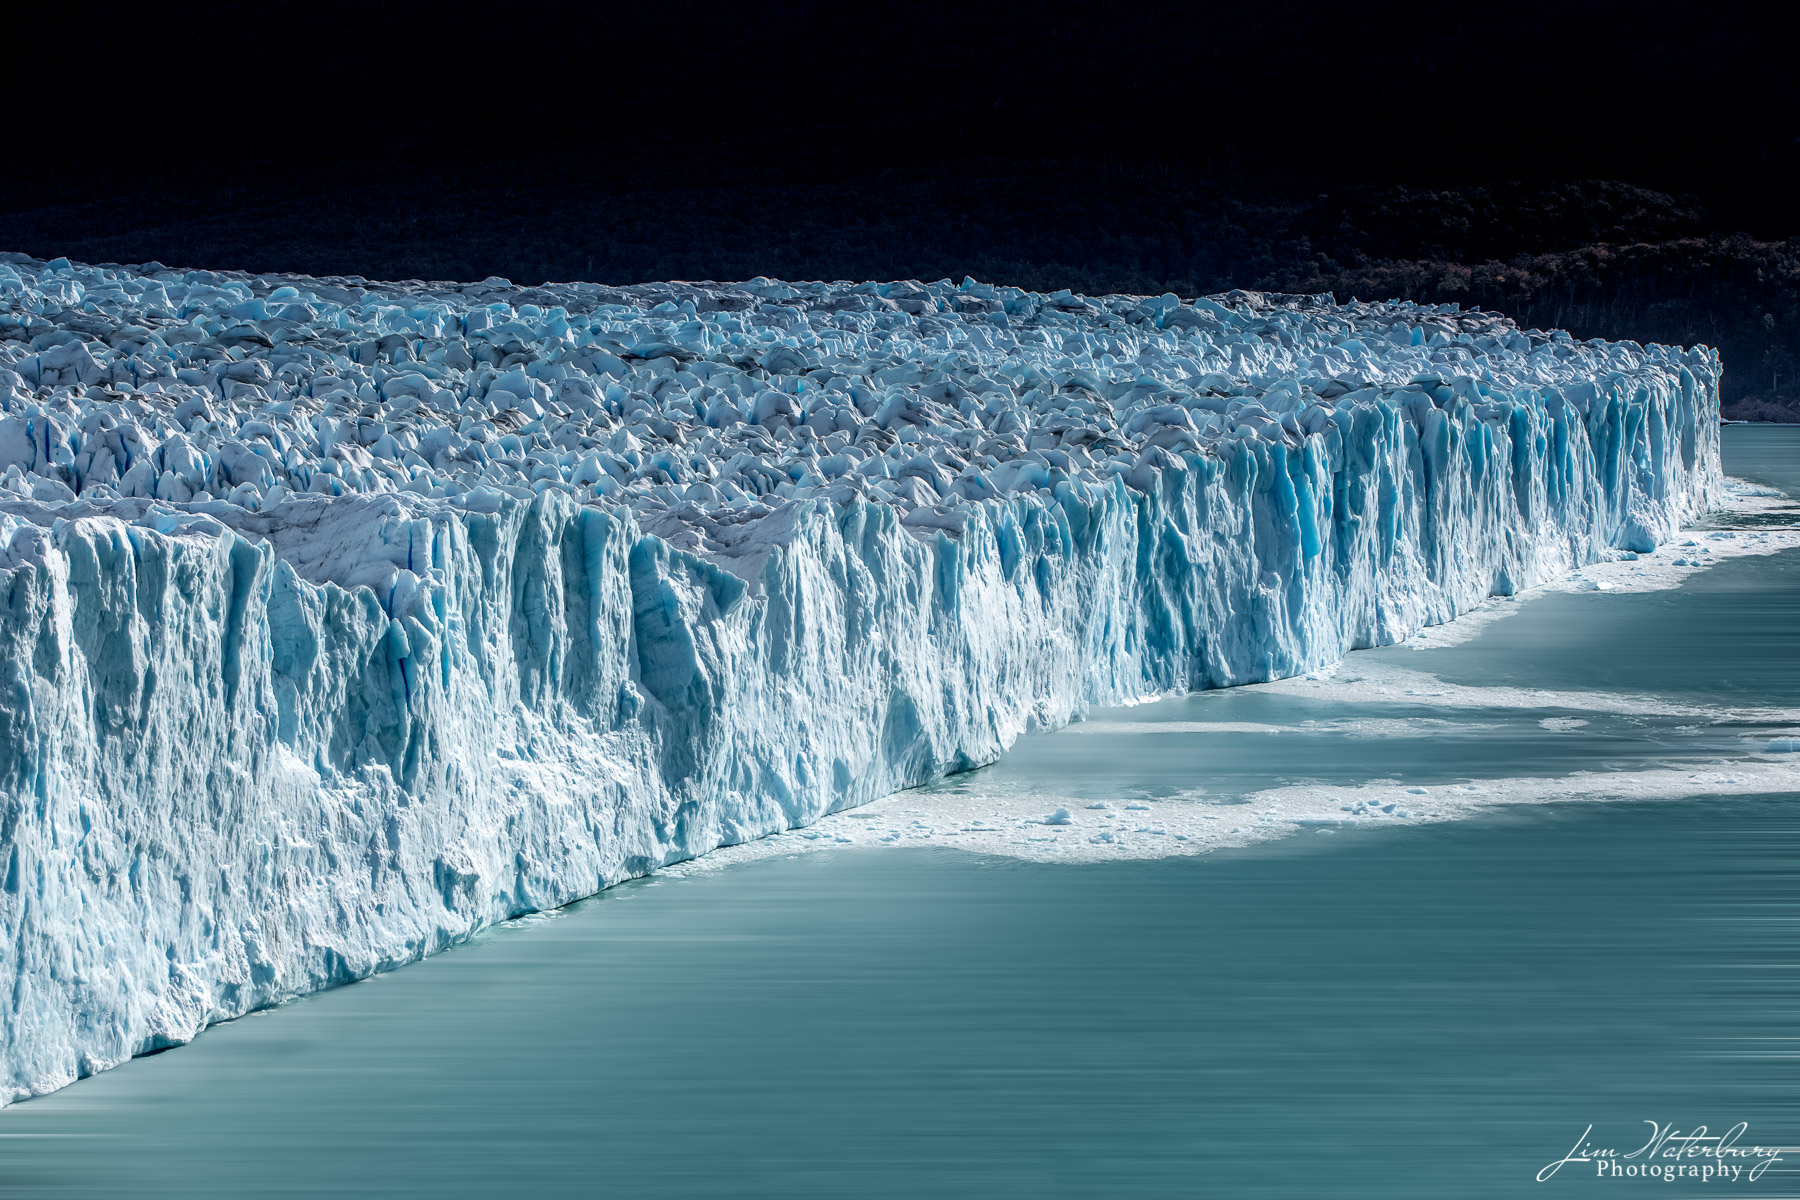 The front wall of the Perito Moreno Glacier in Los Glaciares National Park in Argentina, showing evidence of recent calving activity...